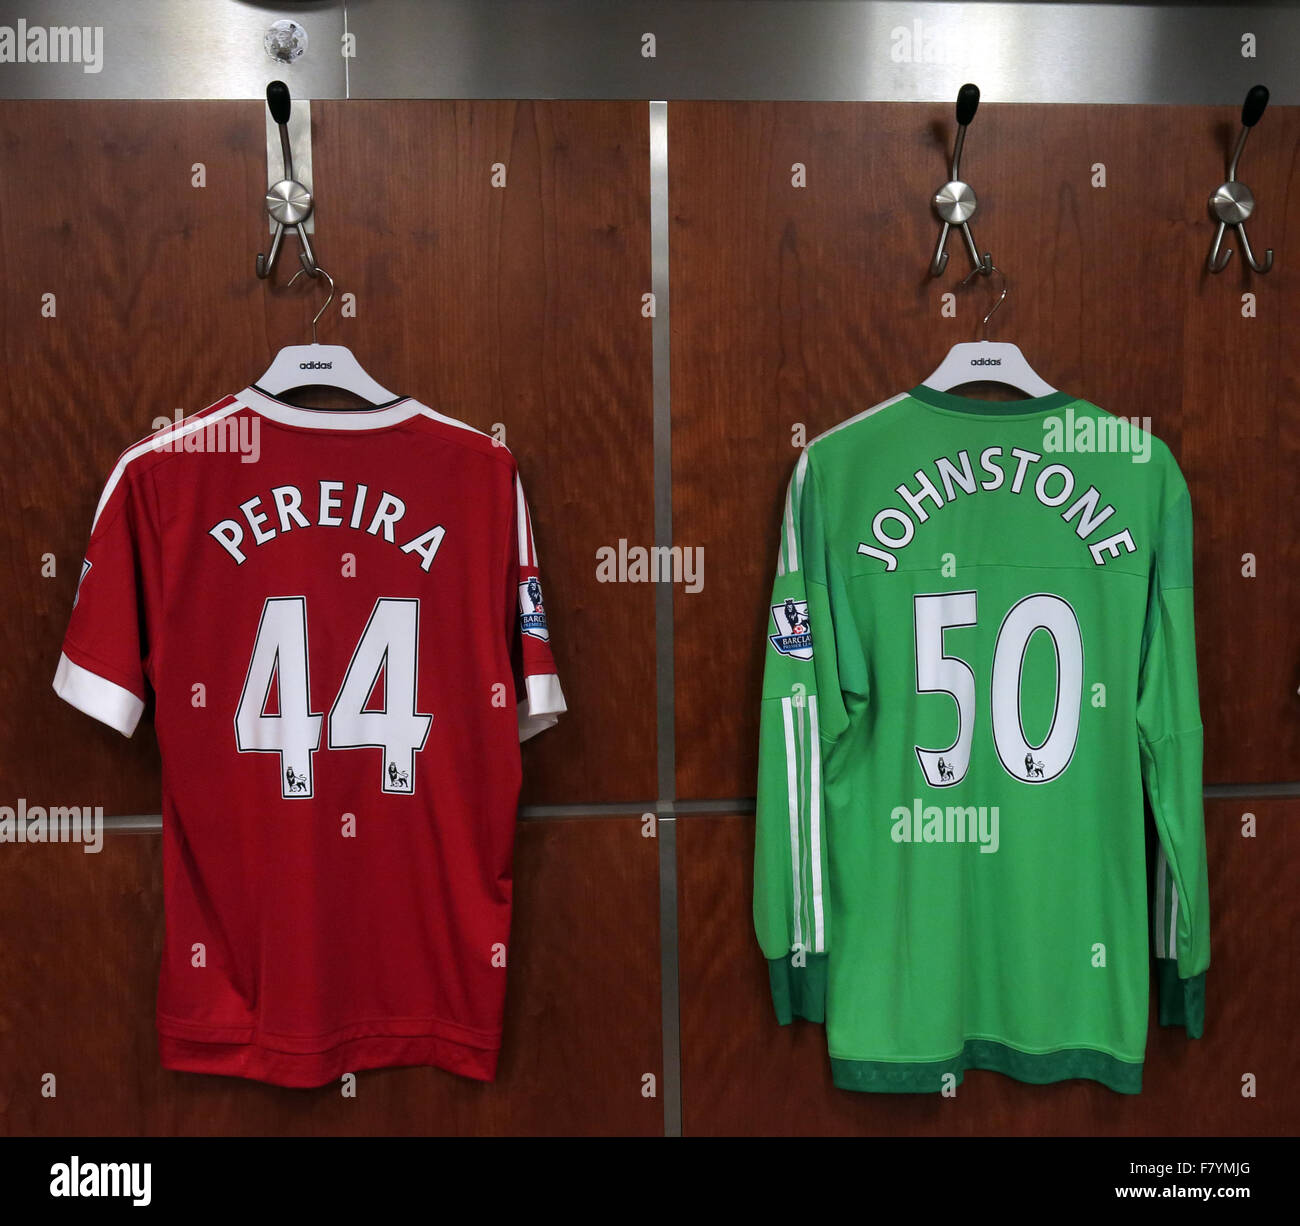 Pereira & Johnstone joueurs shirts,à MUFC dressing, Old Trafford, Manchester, Angleterre Banque D'Images